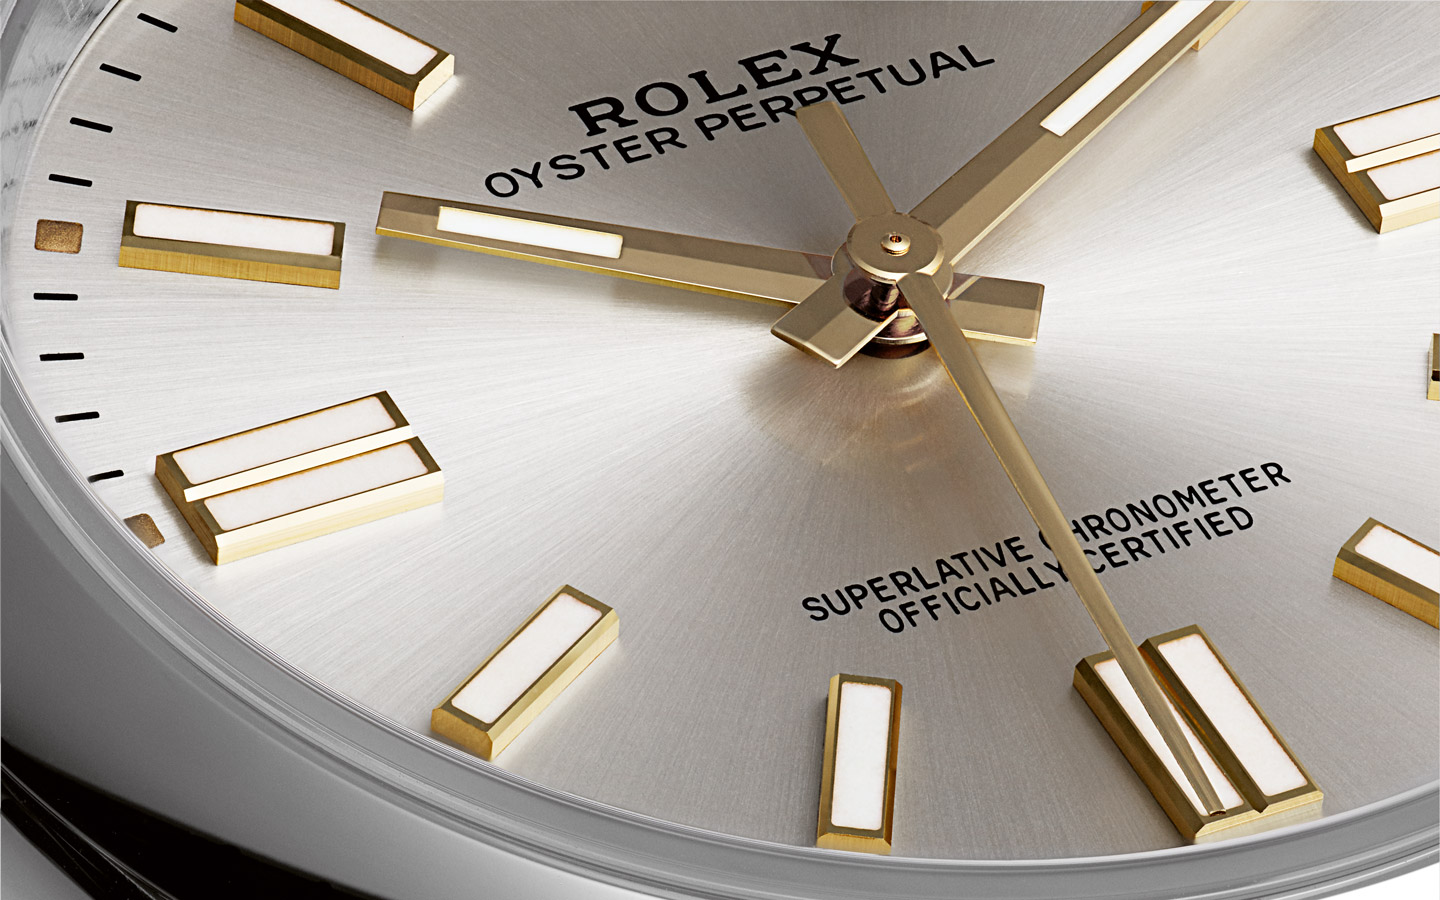 Oyster Perpetual Explorer